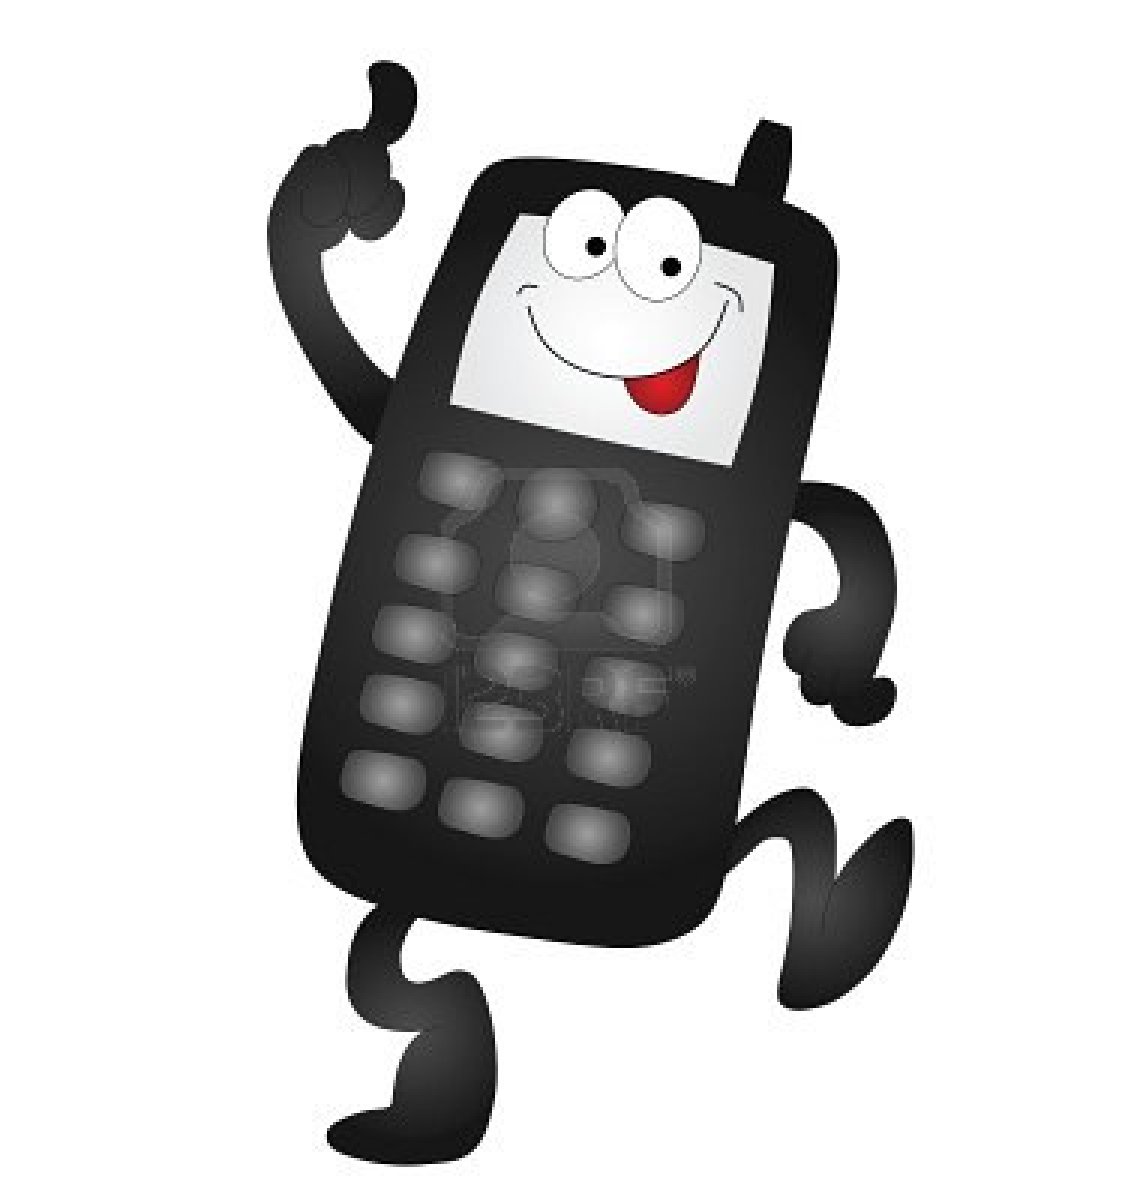 Mobile Phone Cartoon Images